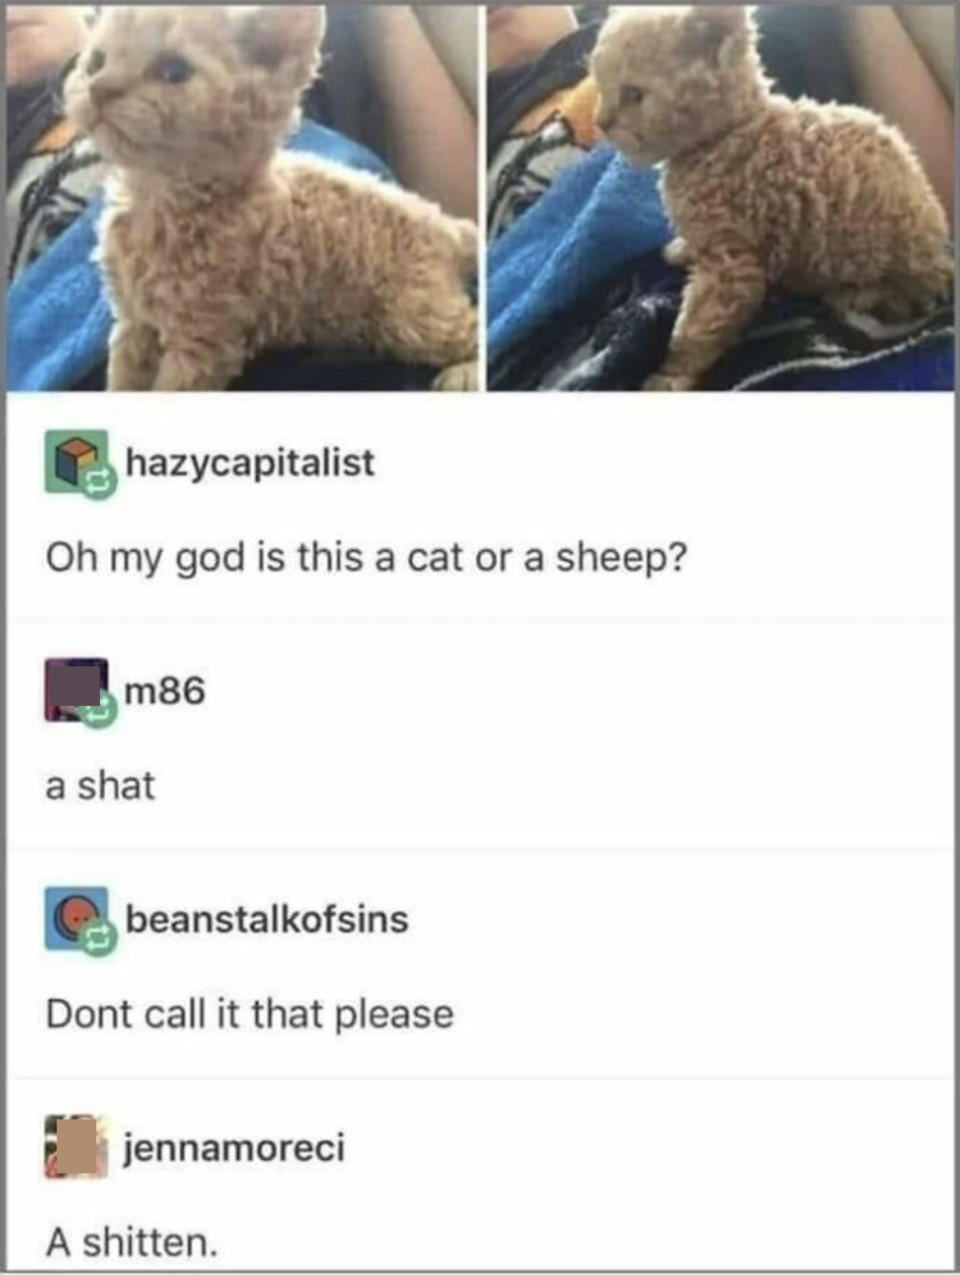 someone asking if that's a cat or a sheep and person calling it a shat and a shitten